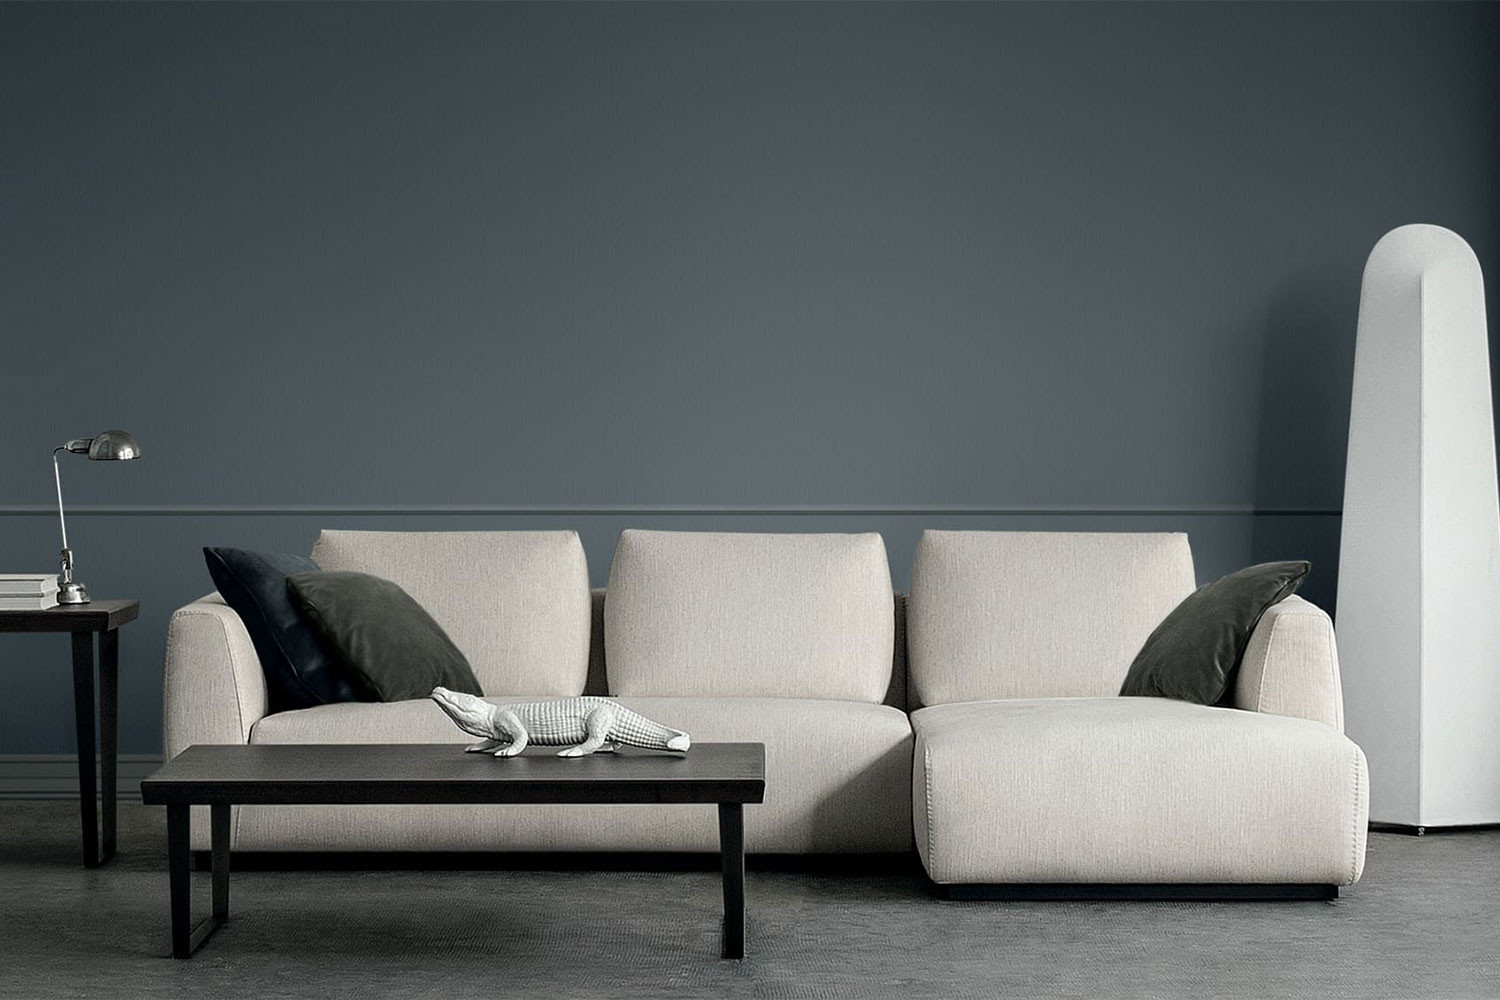 Contemporary, minimalist tight seat sectional sofa with soft loose foam-filled back cushions and high arms